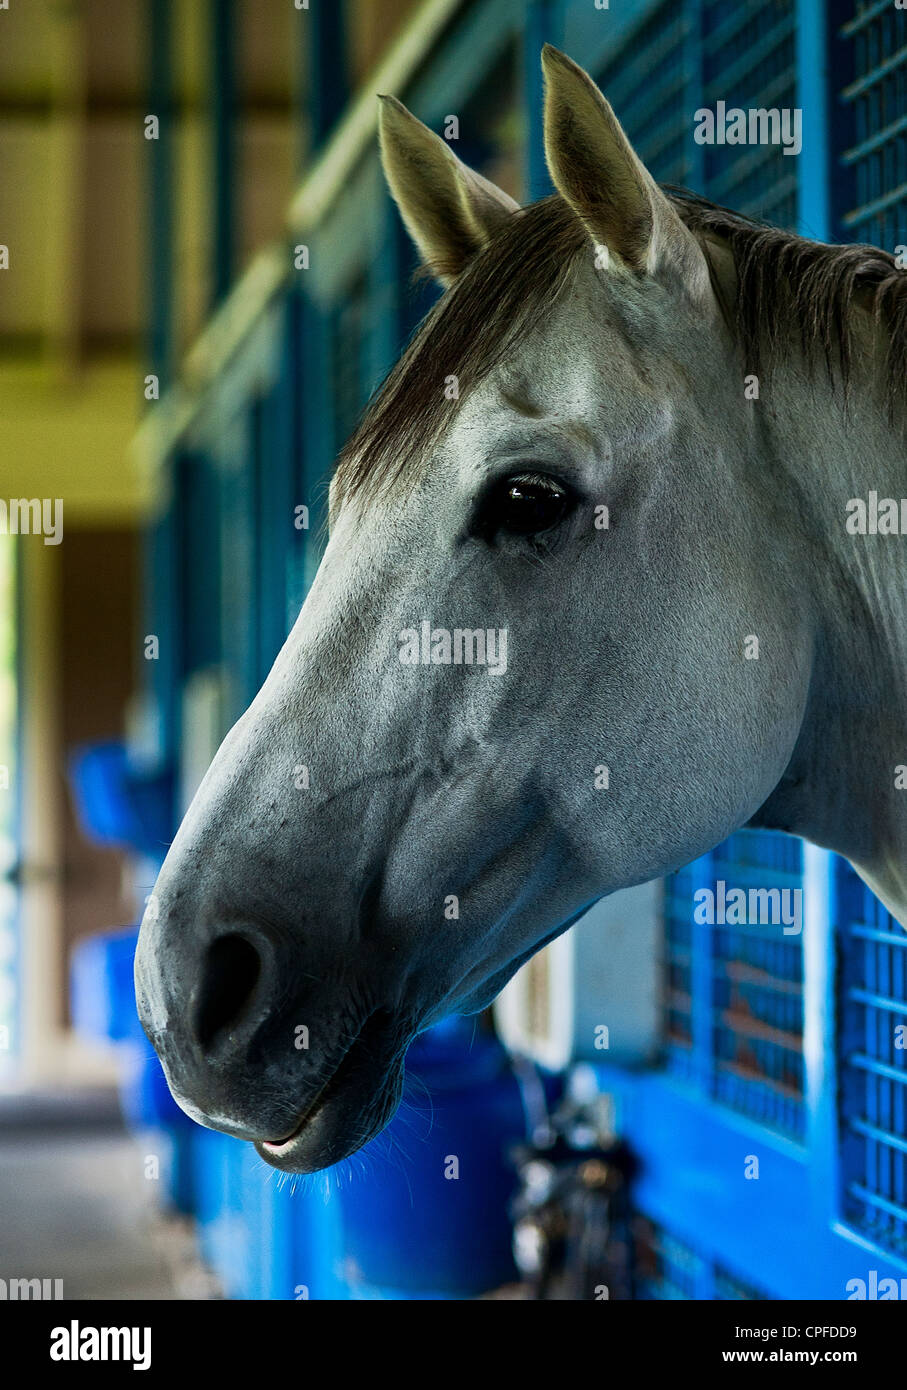 Race horse in stable. Stock Photo